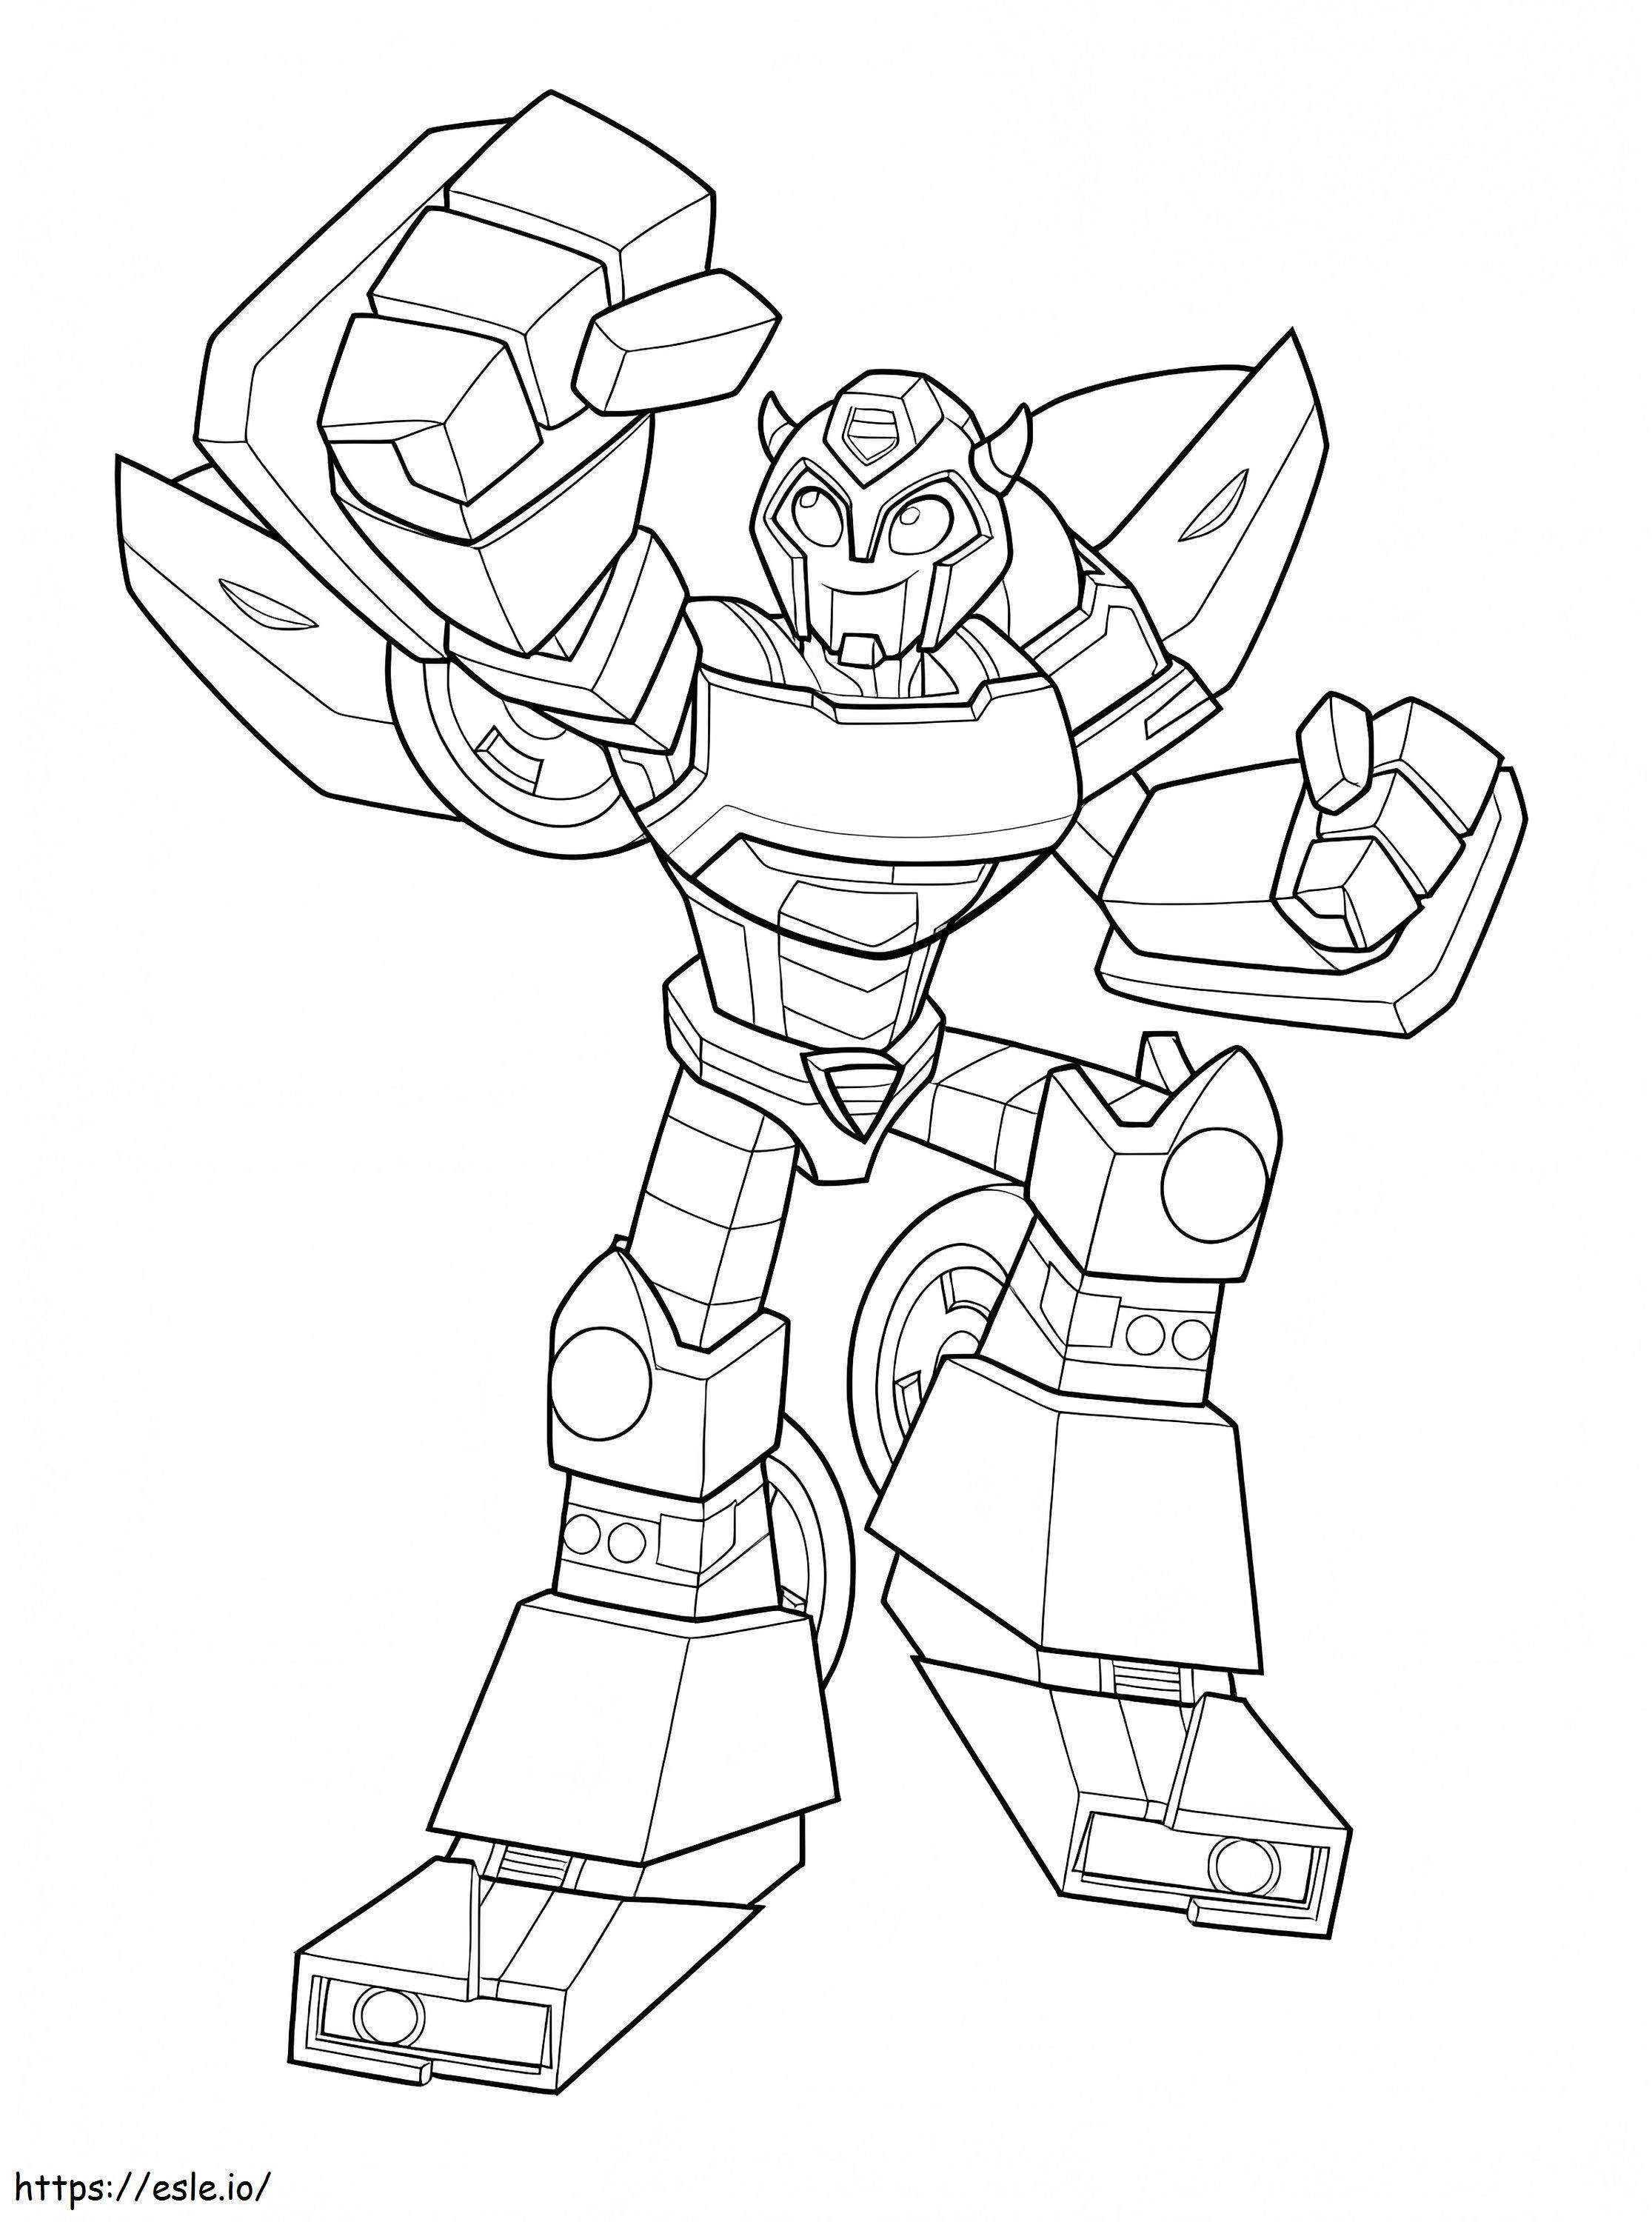 Bumblebee Rescue Bots coloring page